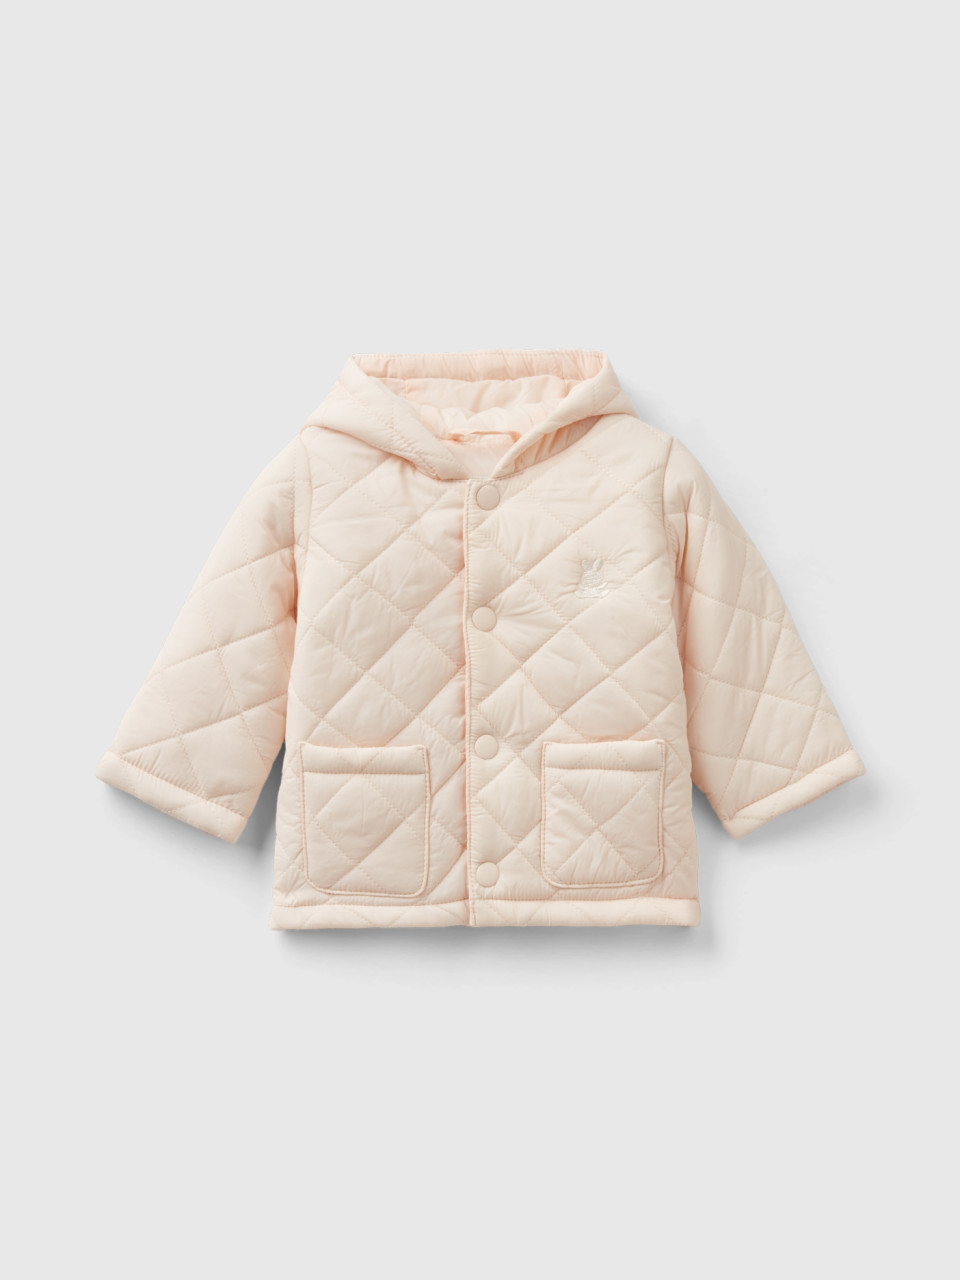 Benetton, Quilted Jacket With Hood, Peach, Kids